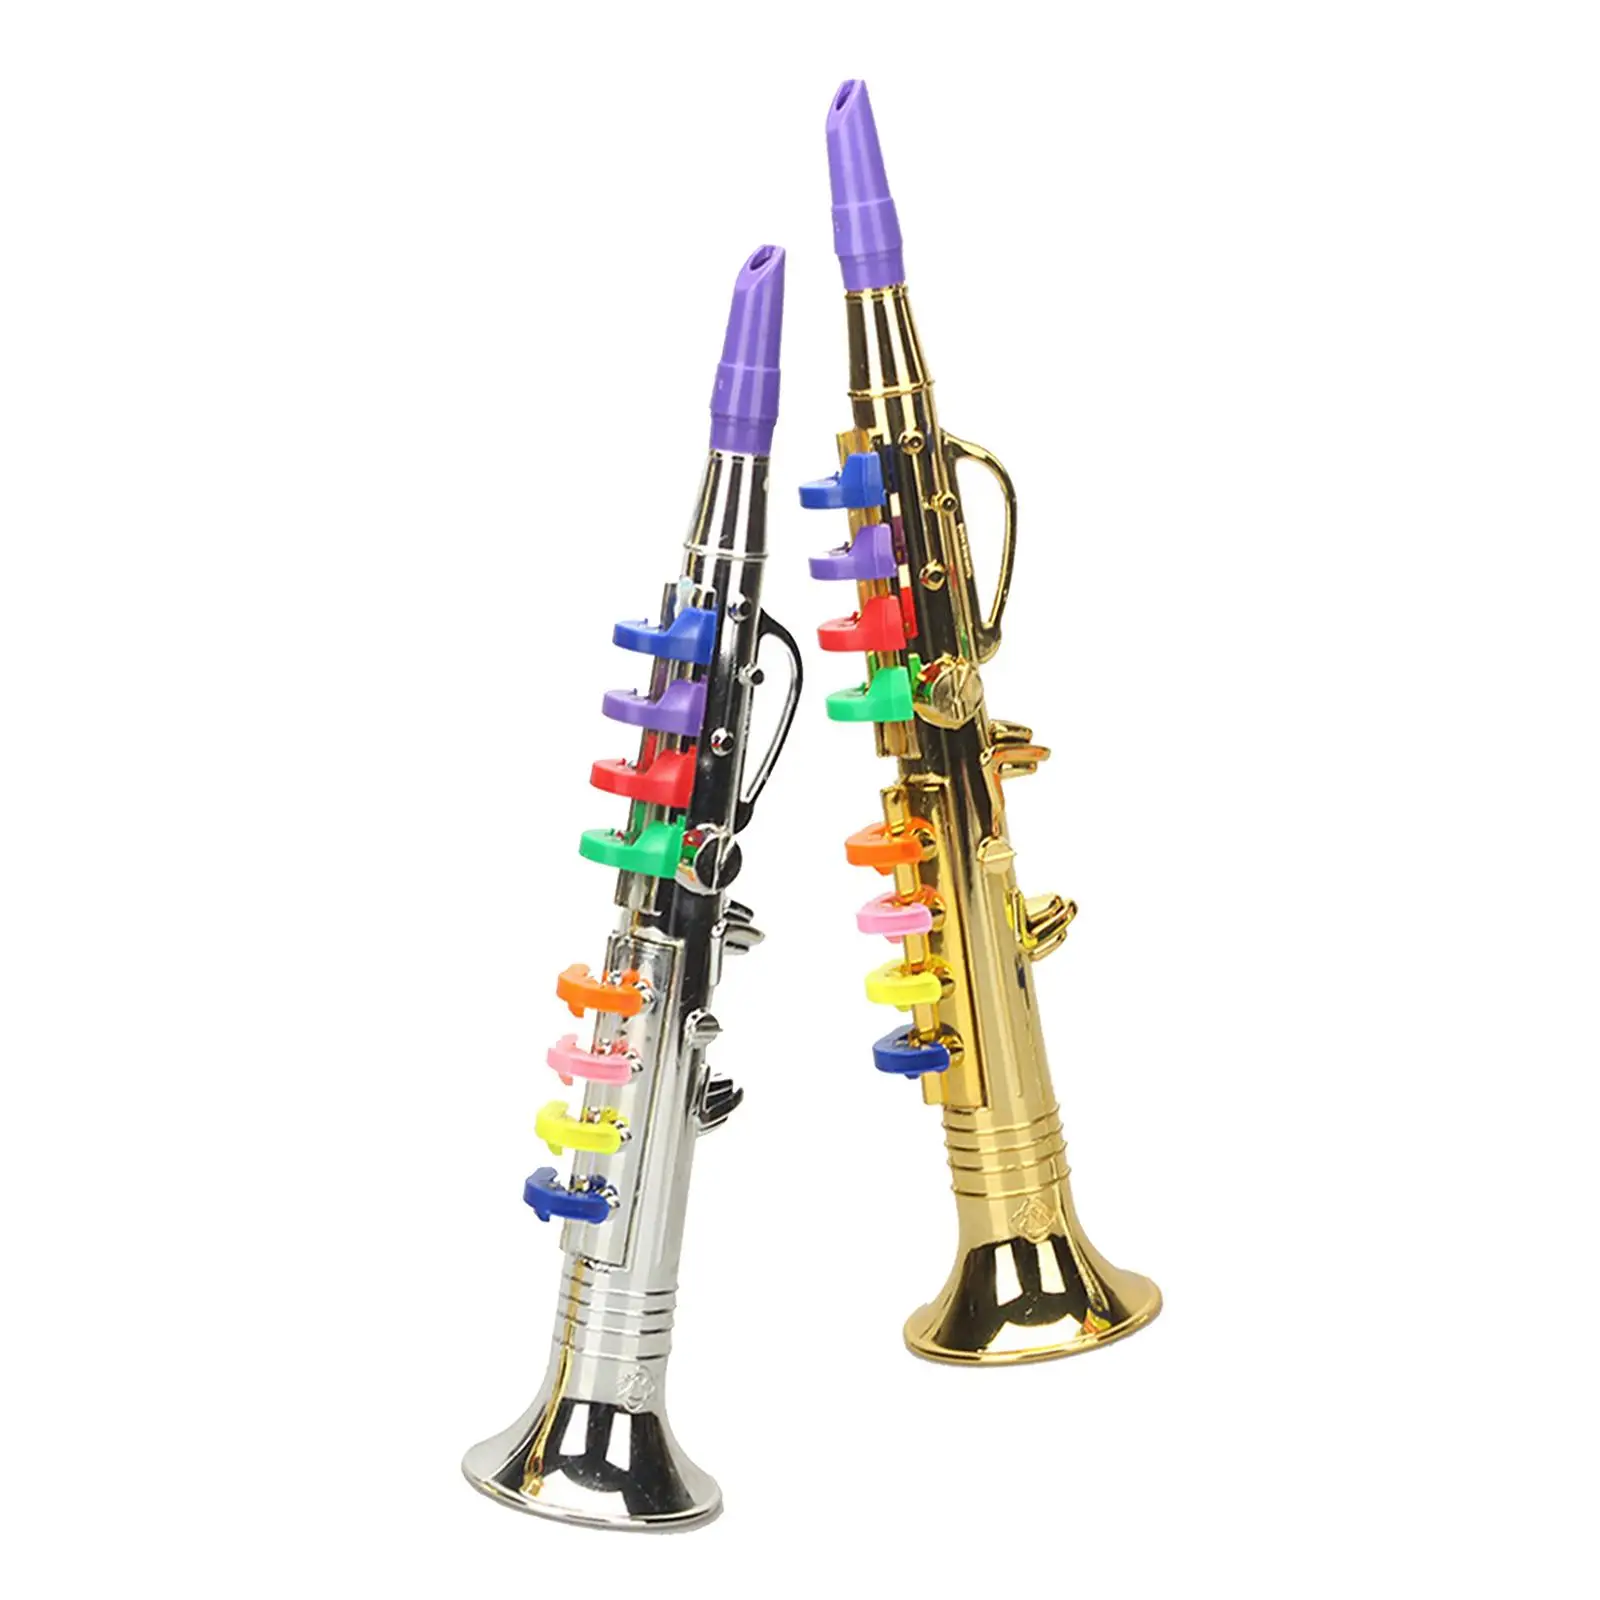 Kids Saxophone Trumpet Clarinet Child Gift Saxophone Musical Toys Music Playing Tool Simulation instrument With 8 Colored Keys